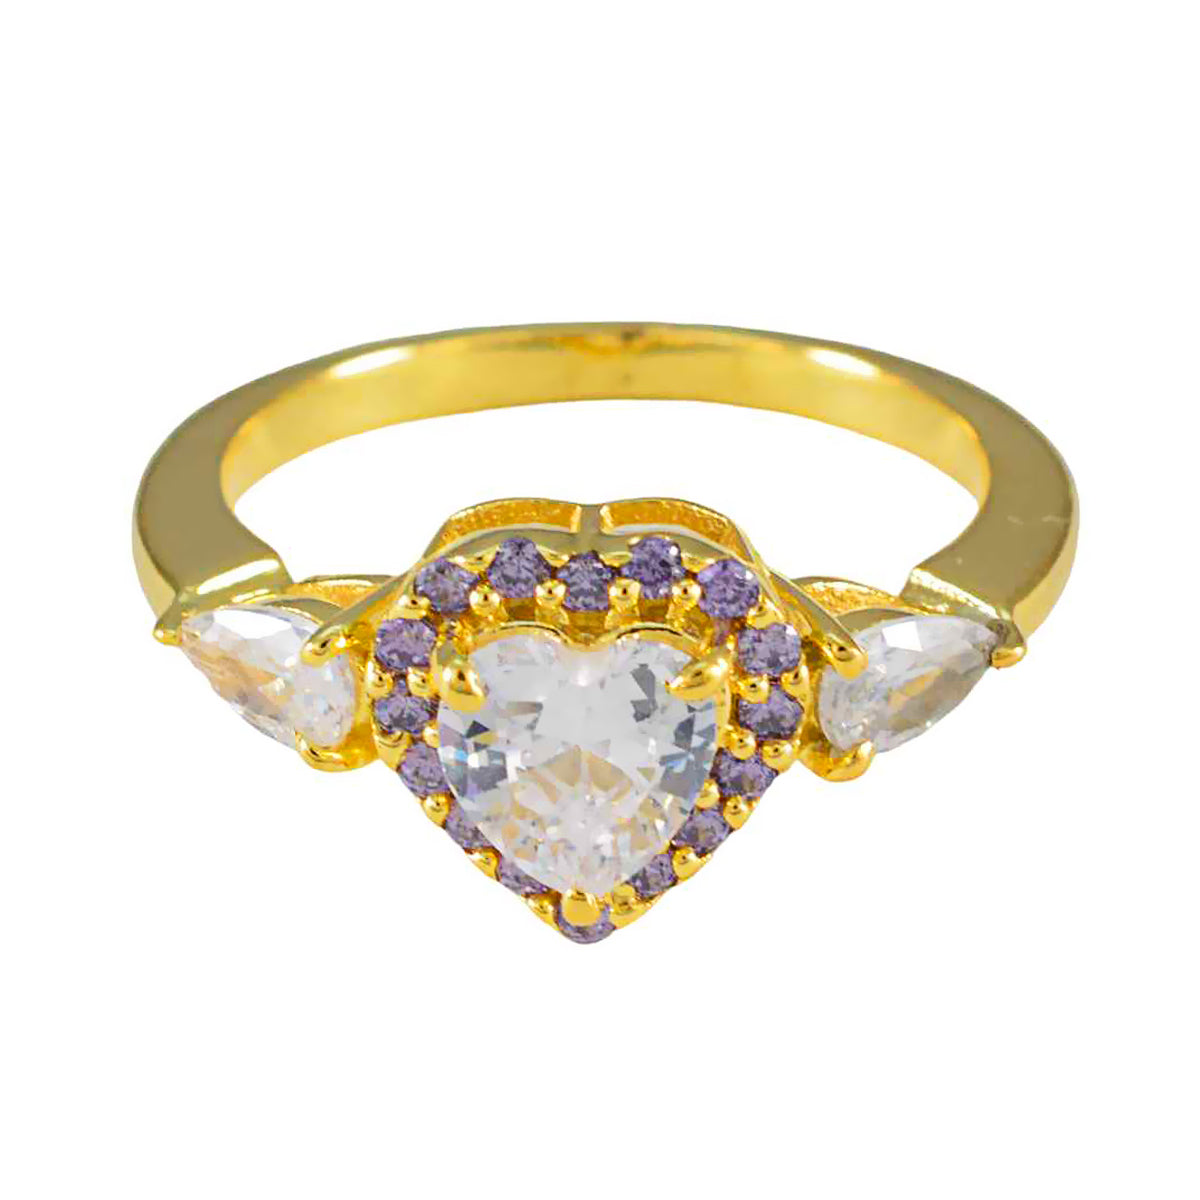 Riyo Dazzling Silver Ring With Yellow Gold Plating Amethyst Stone Heart Shape Prong Setting Jewelry New Year Ring